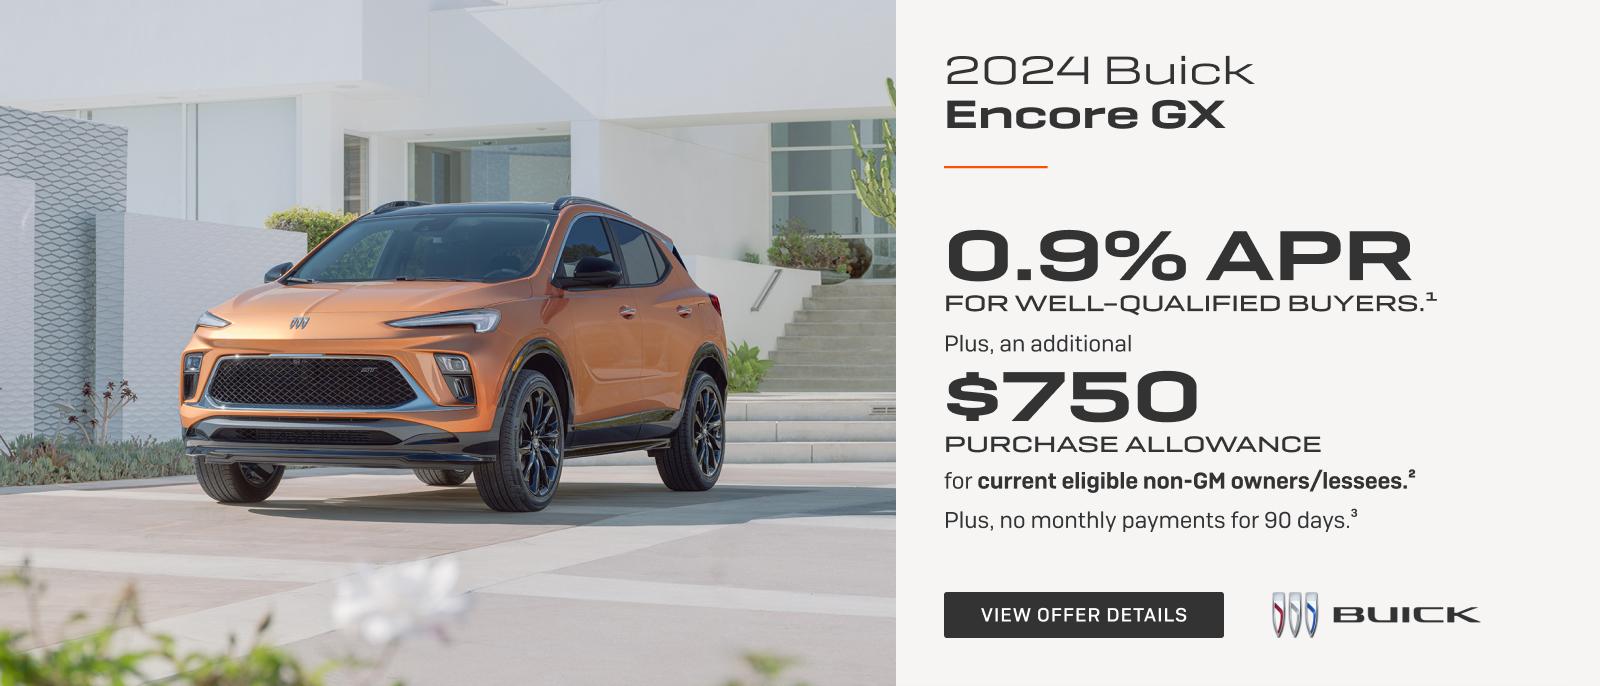 0.9% APR 
FOR WELL-QUALIFIED BUYERS.1

Plus, an additional $750 PURCHASE ALLOWANCE for current eligible non-GM owners/lessees.2

Plus, no monthly payments for 90 days.3